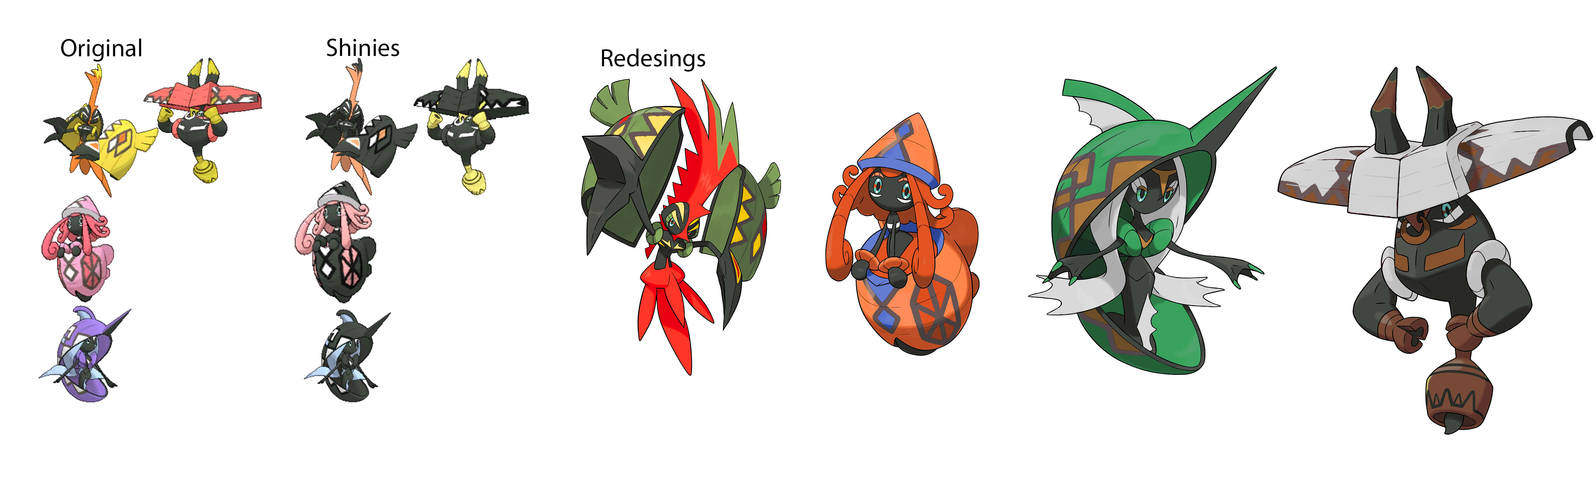 Shiny redesigns ultra beasts by GGArtwork on DeviantArt